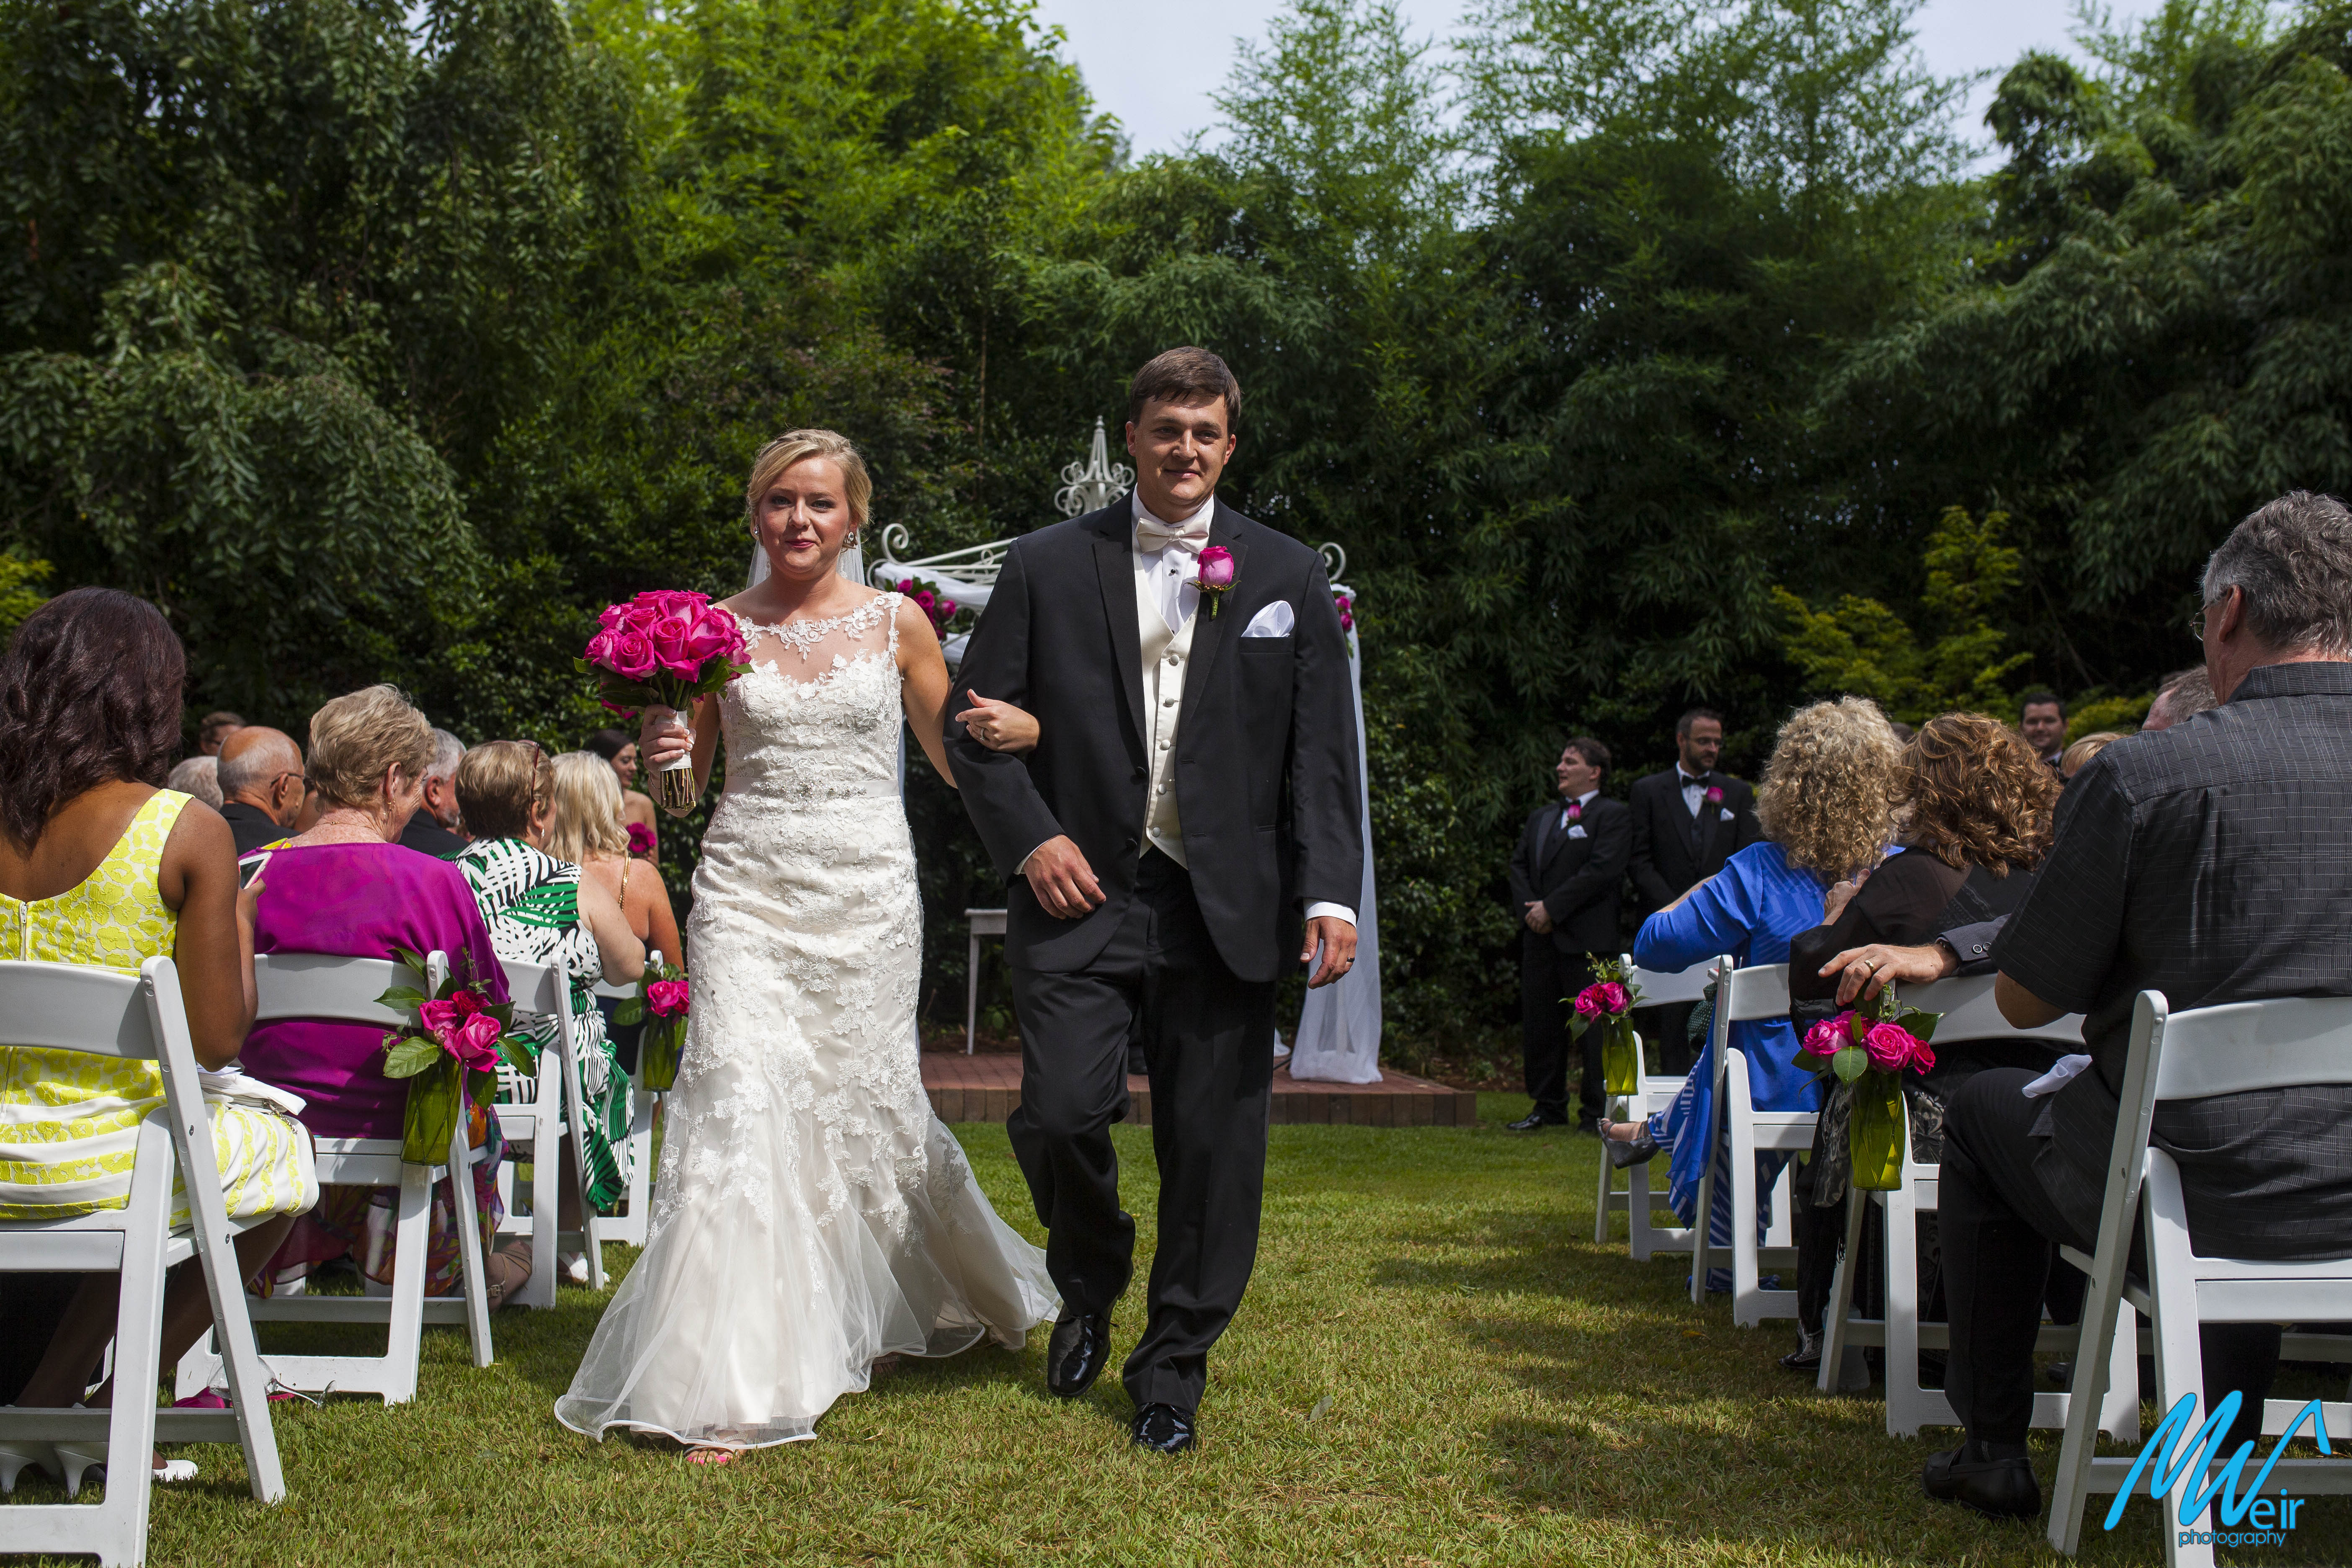 bride and groom walk back up aisle after ceremony